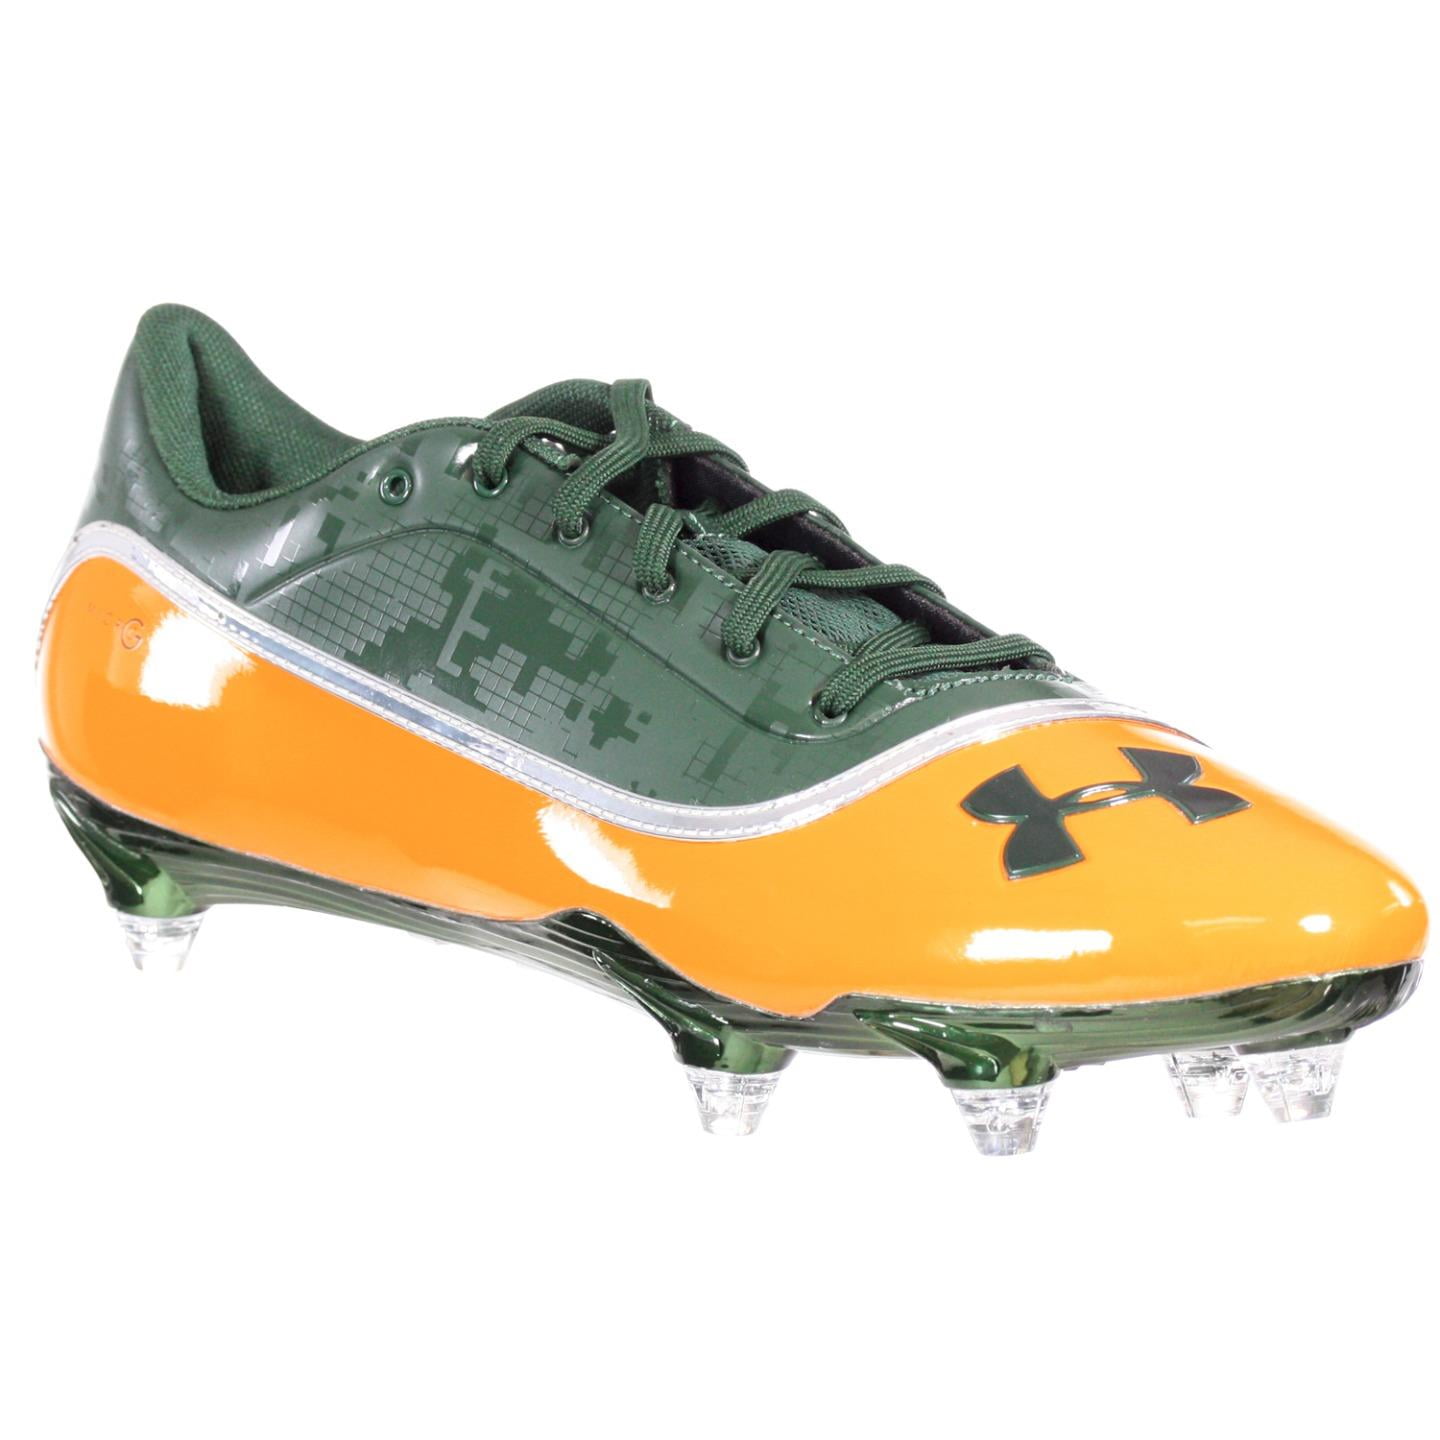 green and gold football cleats